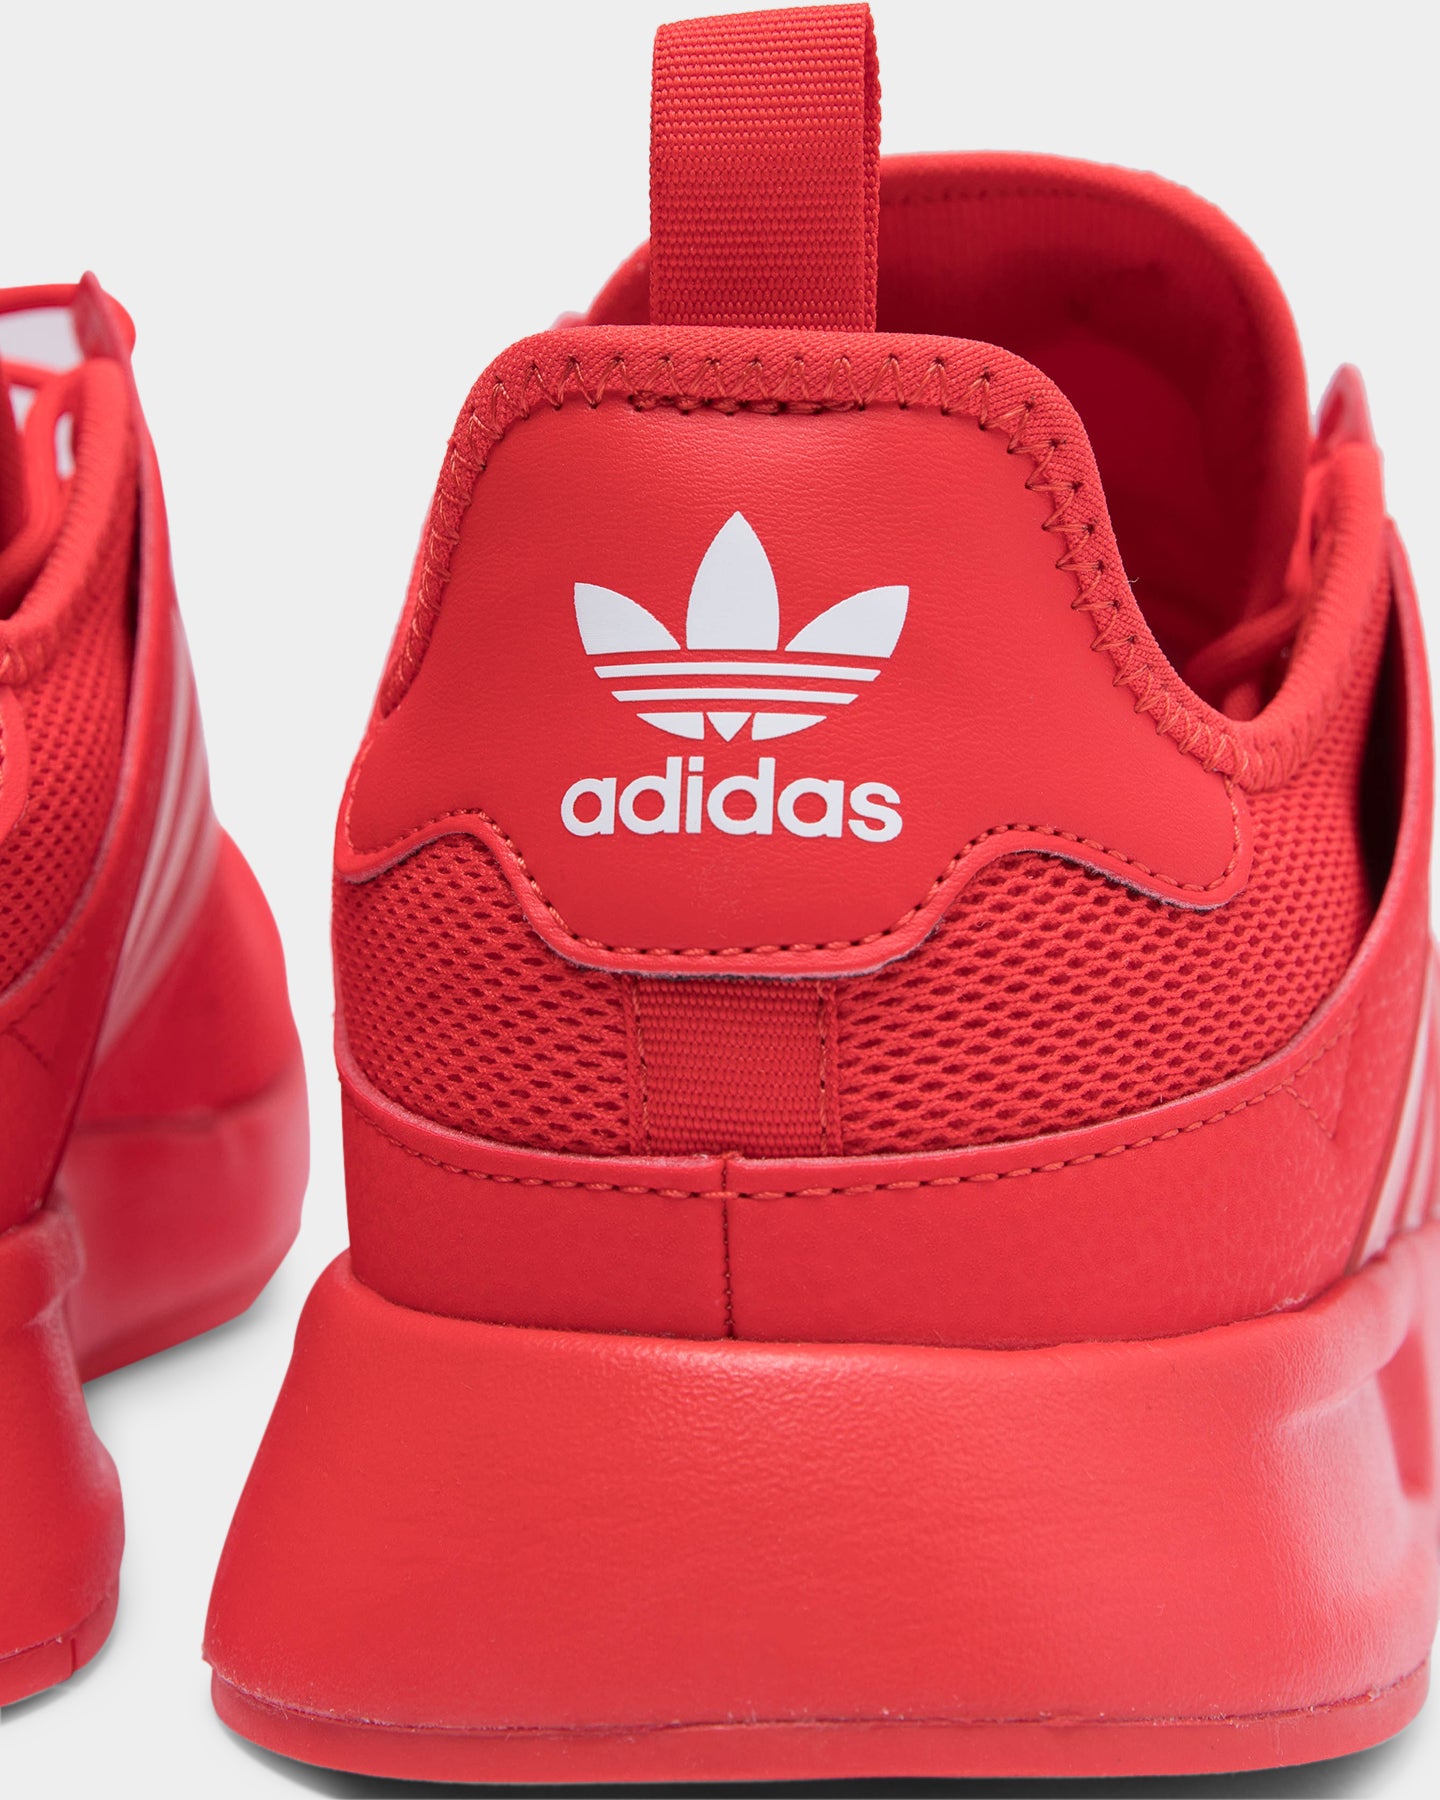 adidas x_plr black and red